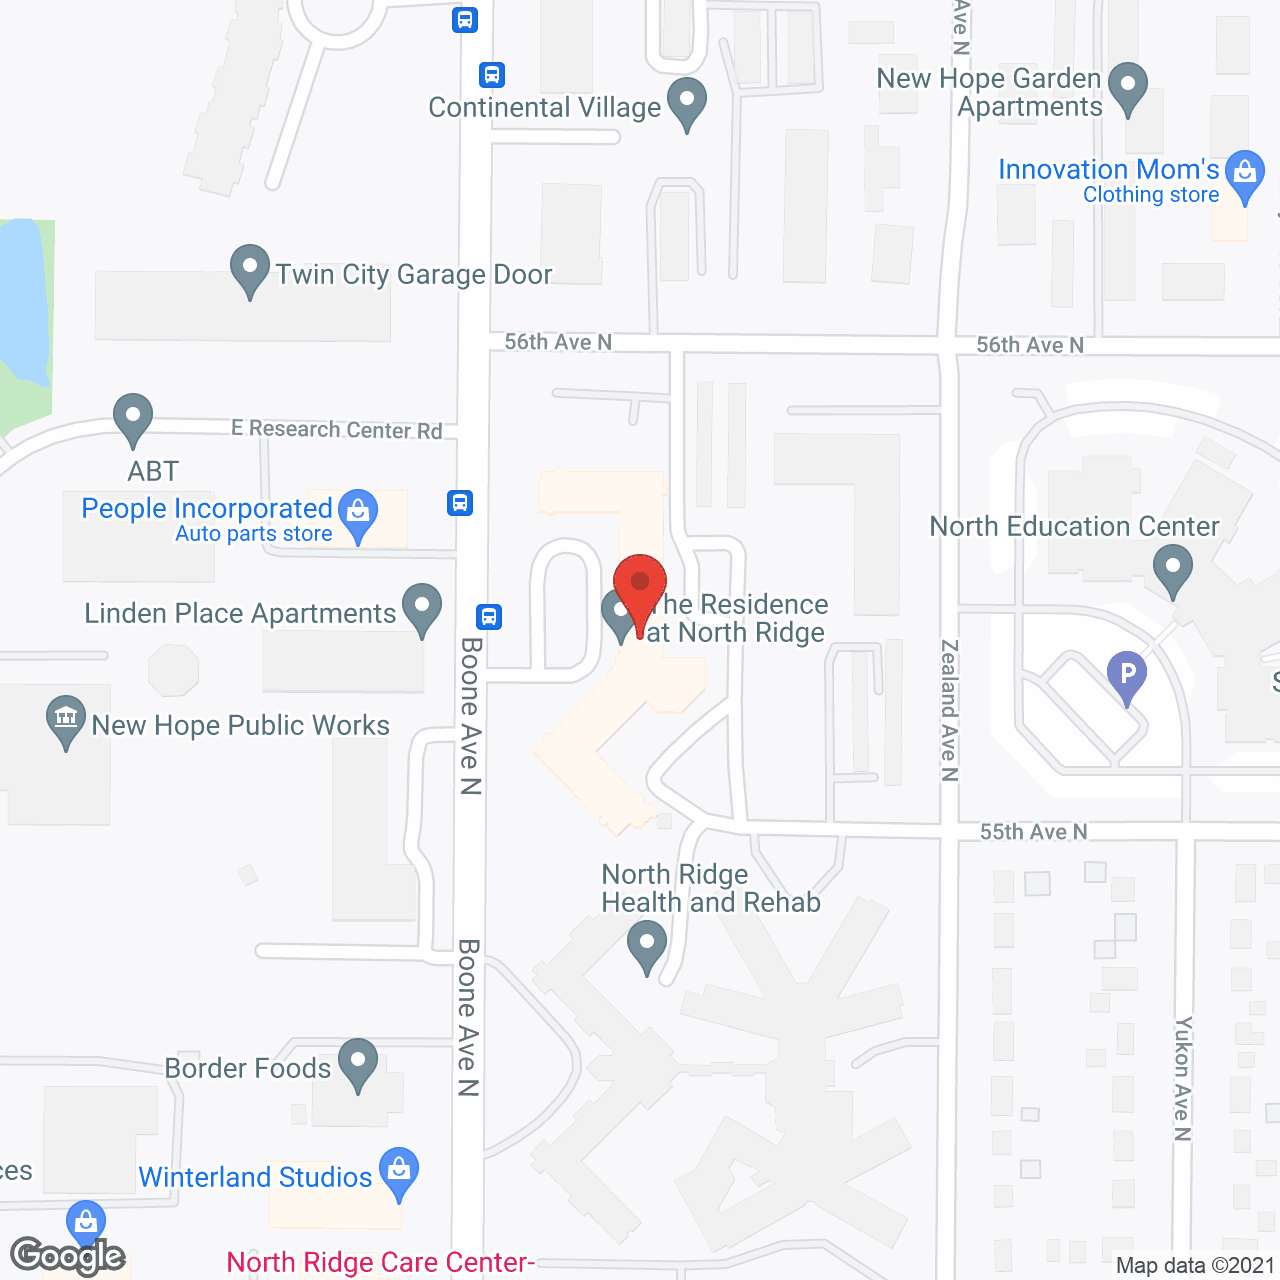 The Residence at North Ridge in google map